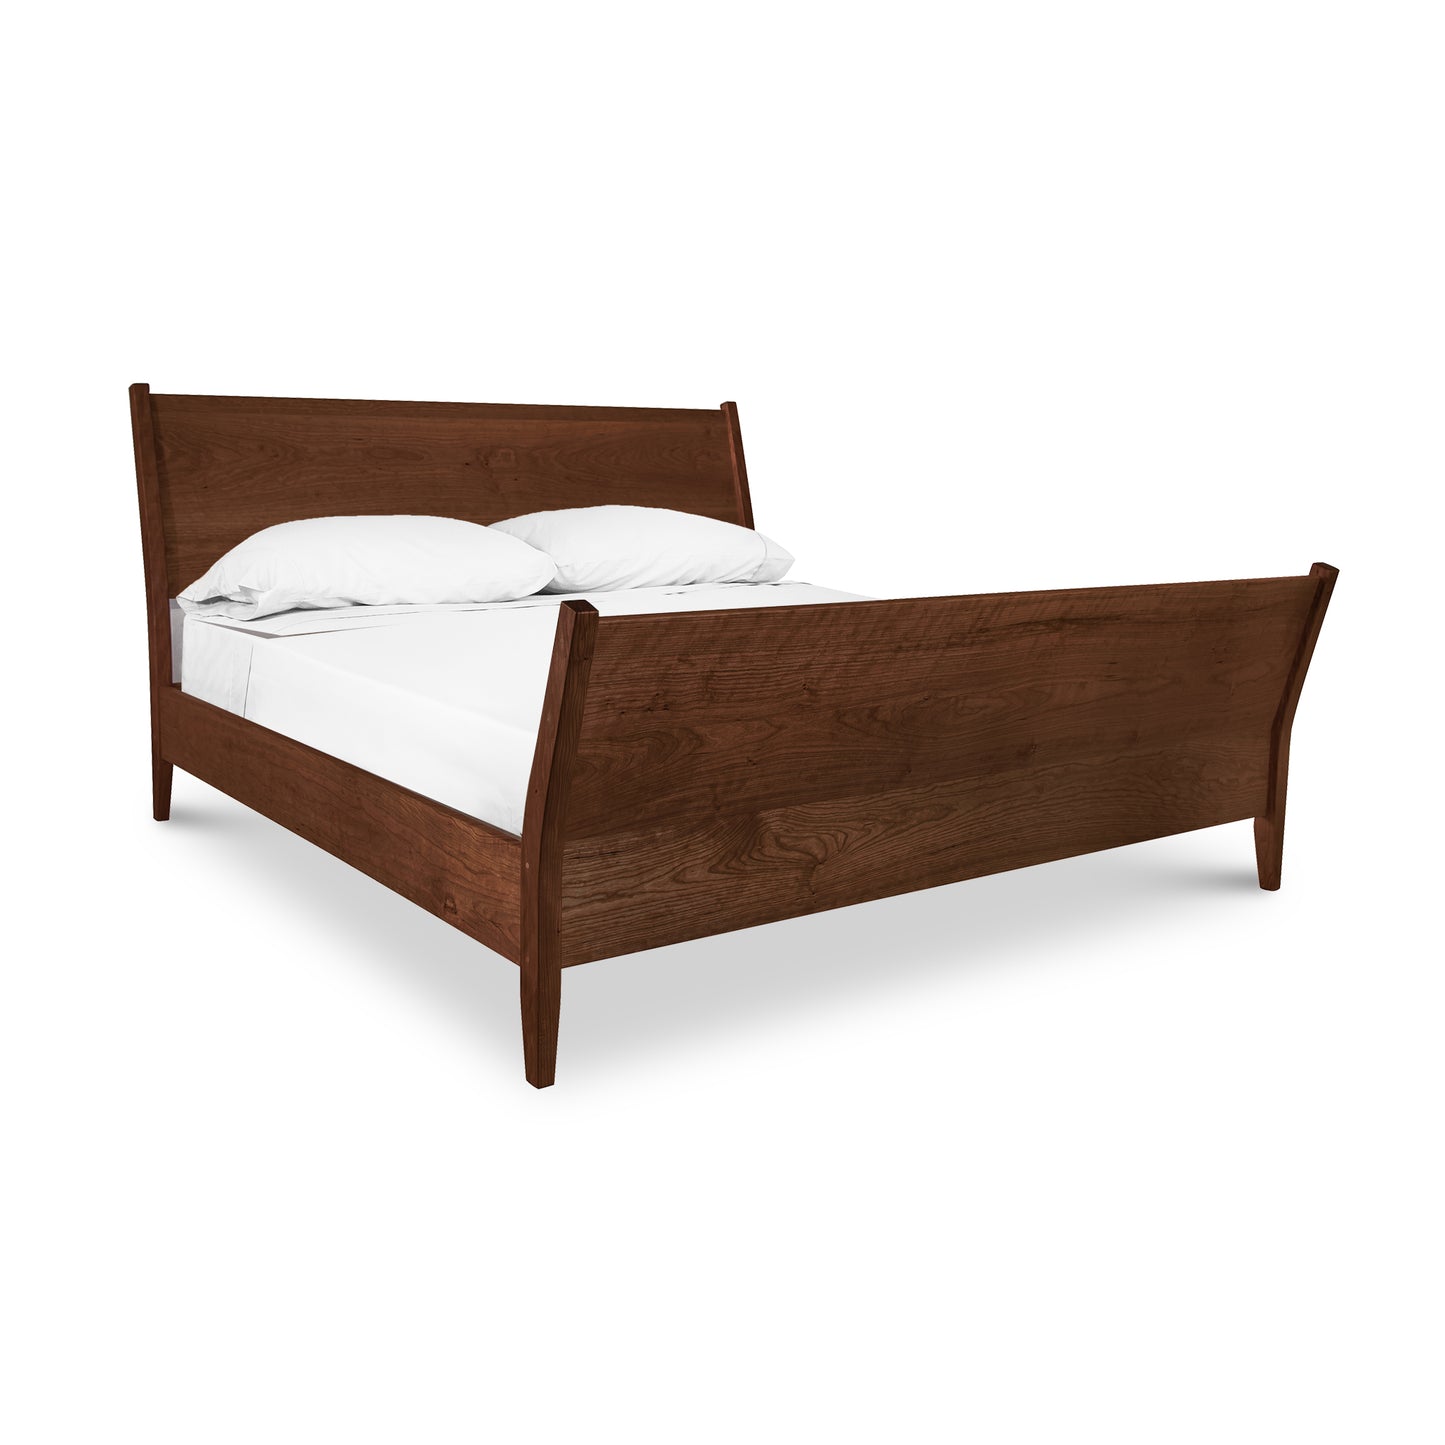 An Maple Corner Woodworks Andover Modern Incline Sleigh Bed with a curved headboard and footboard, featuring two white pillows on a white bedsheet, isolated on a white background.